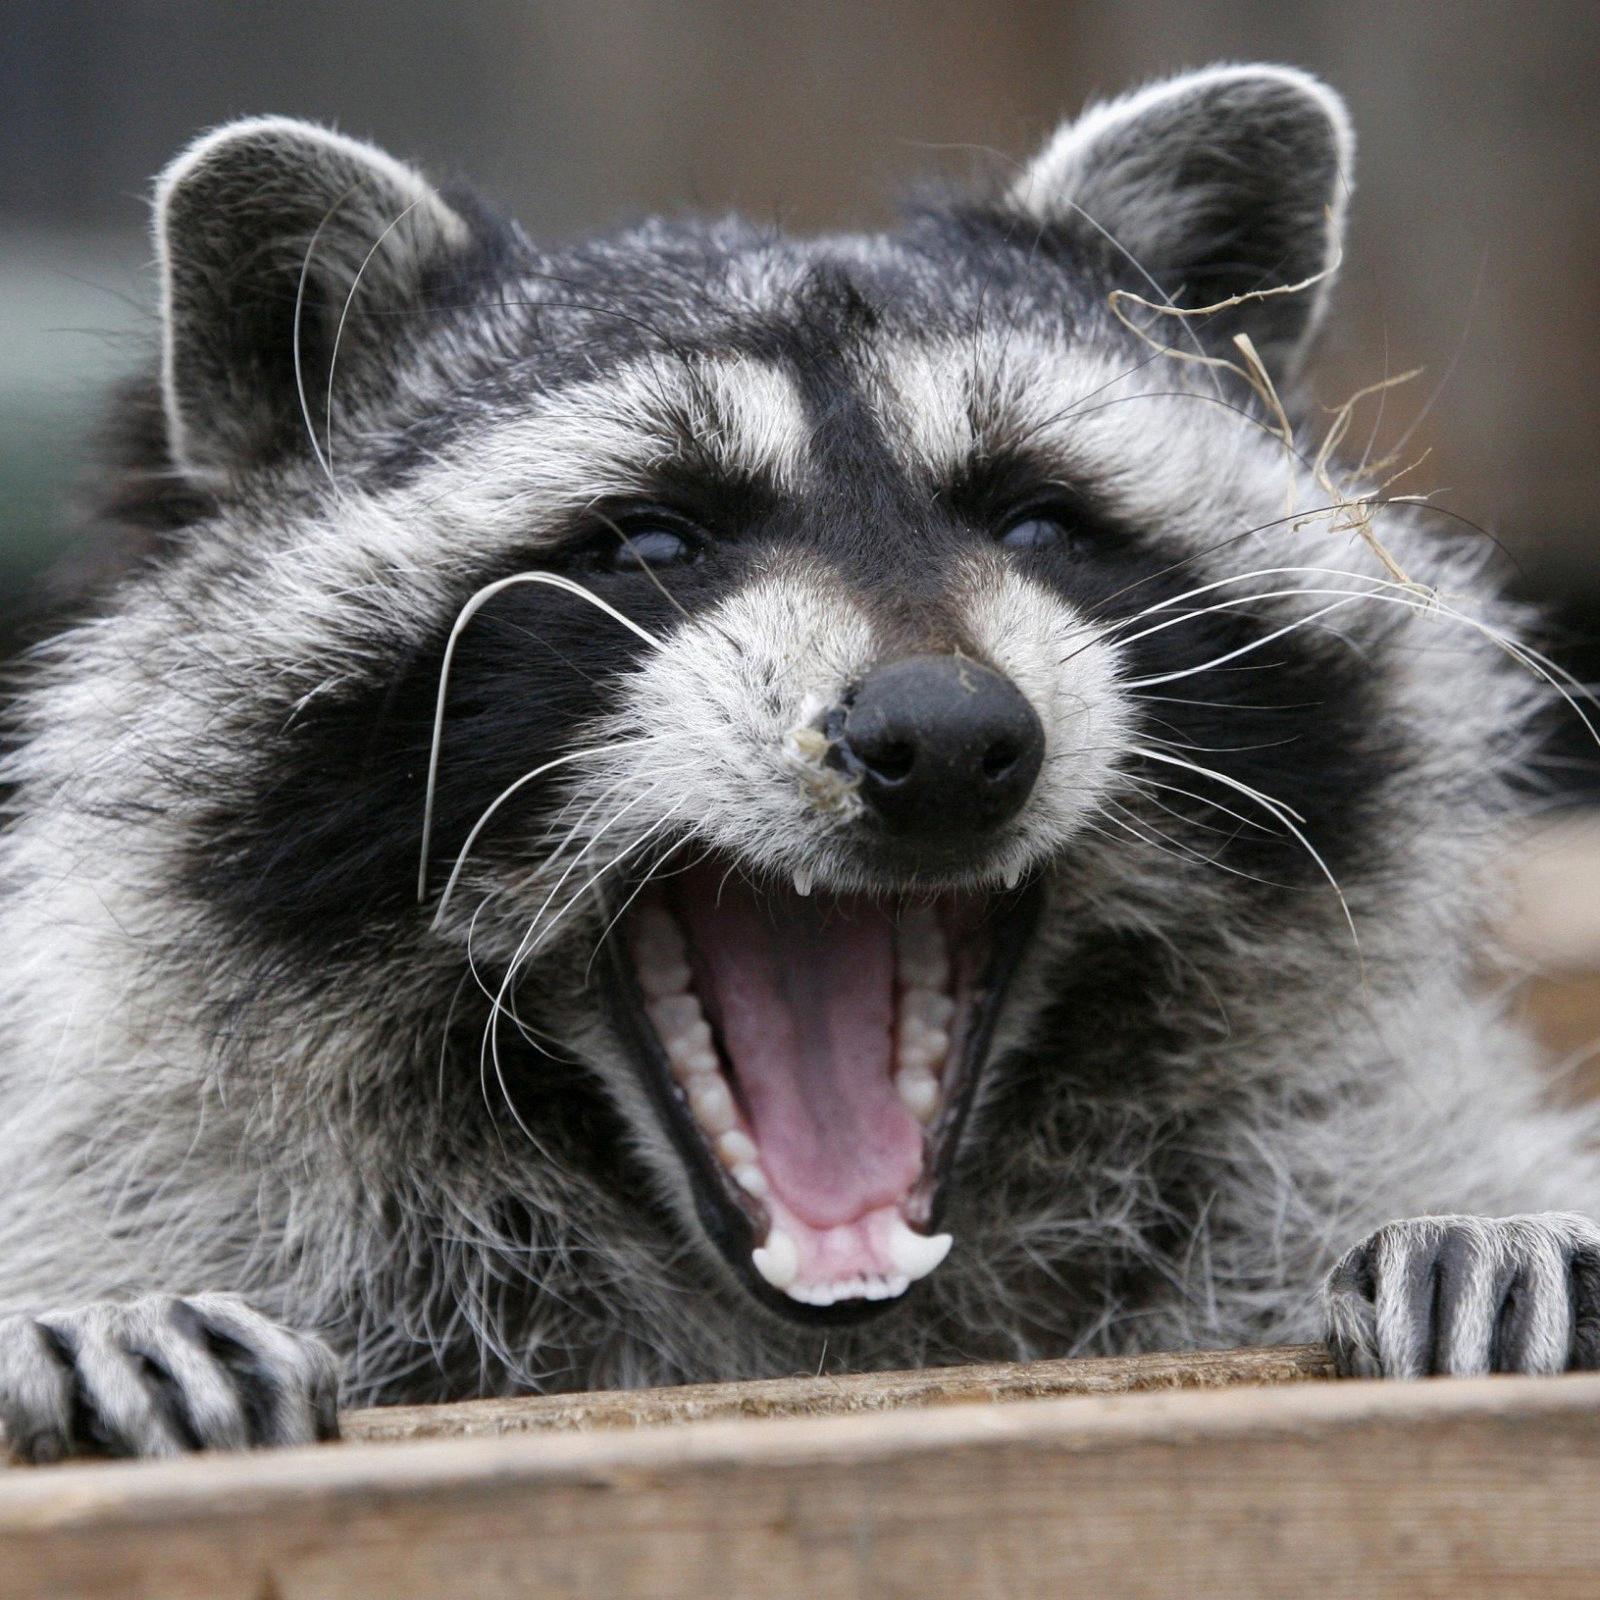 do raccoons have opposable thumbs